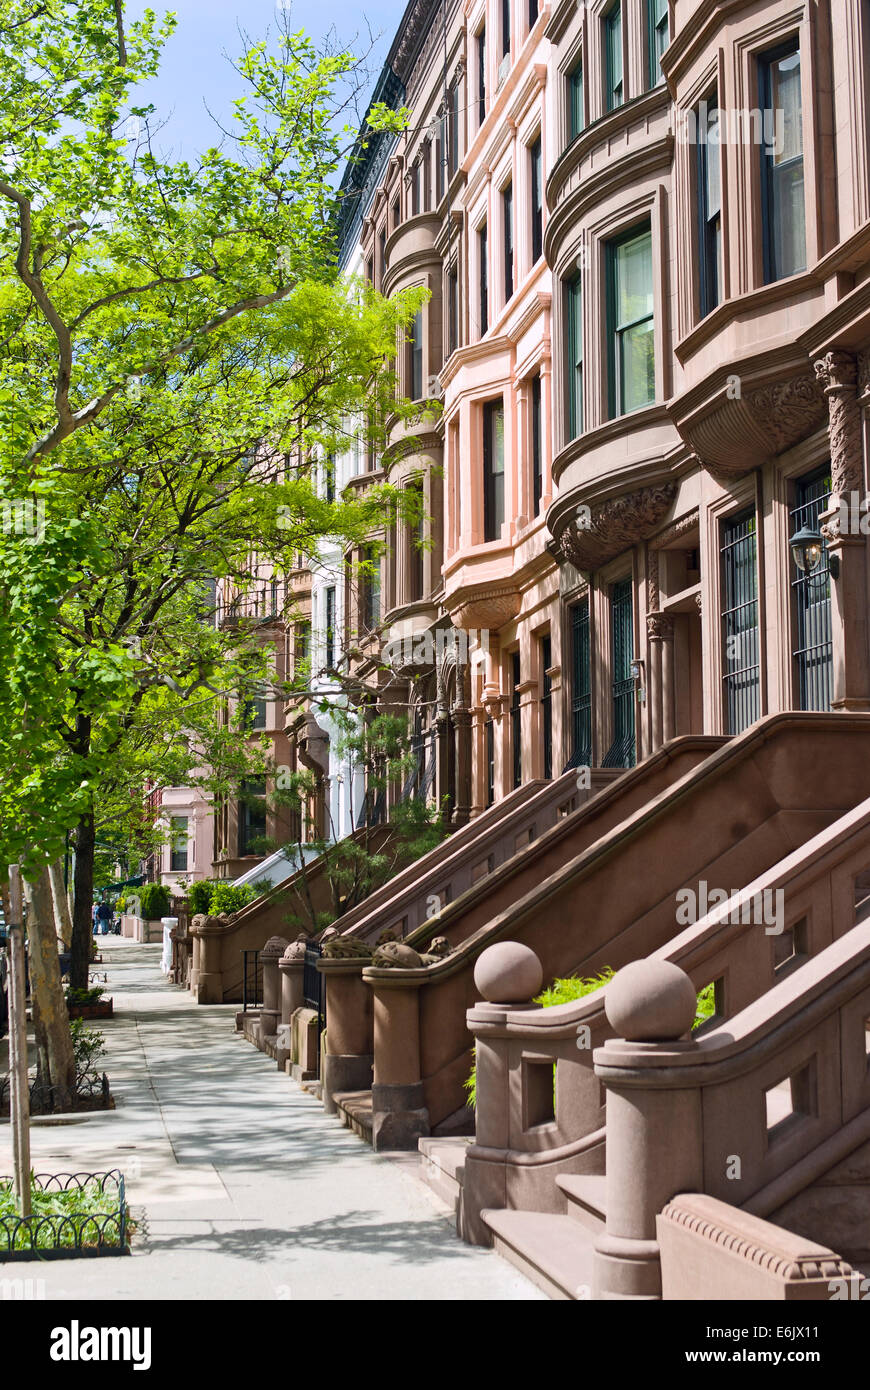 Brownstone apartment houses, buildings, residences on the Upper West Side, Manhattan, New York City, New York. Stock Photo